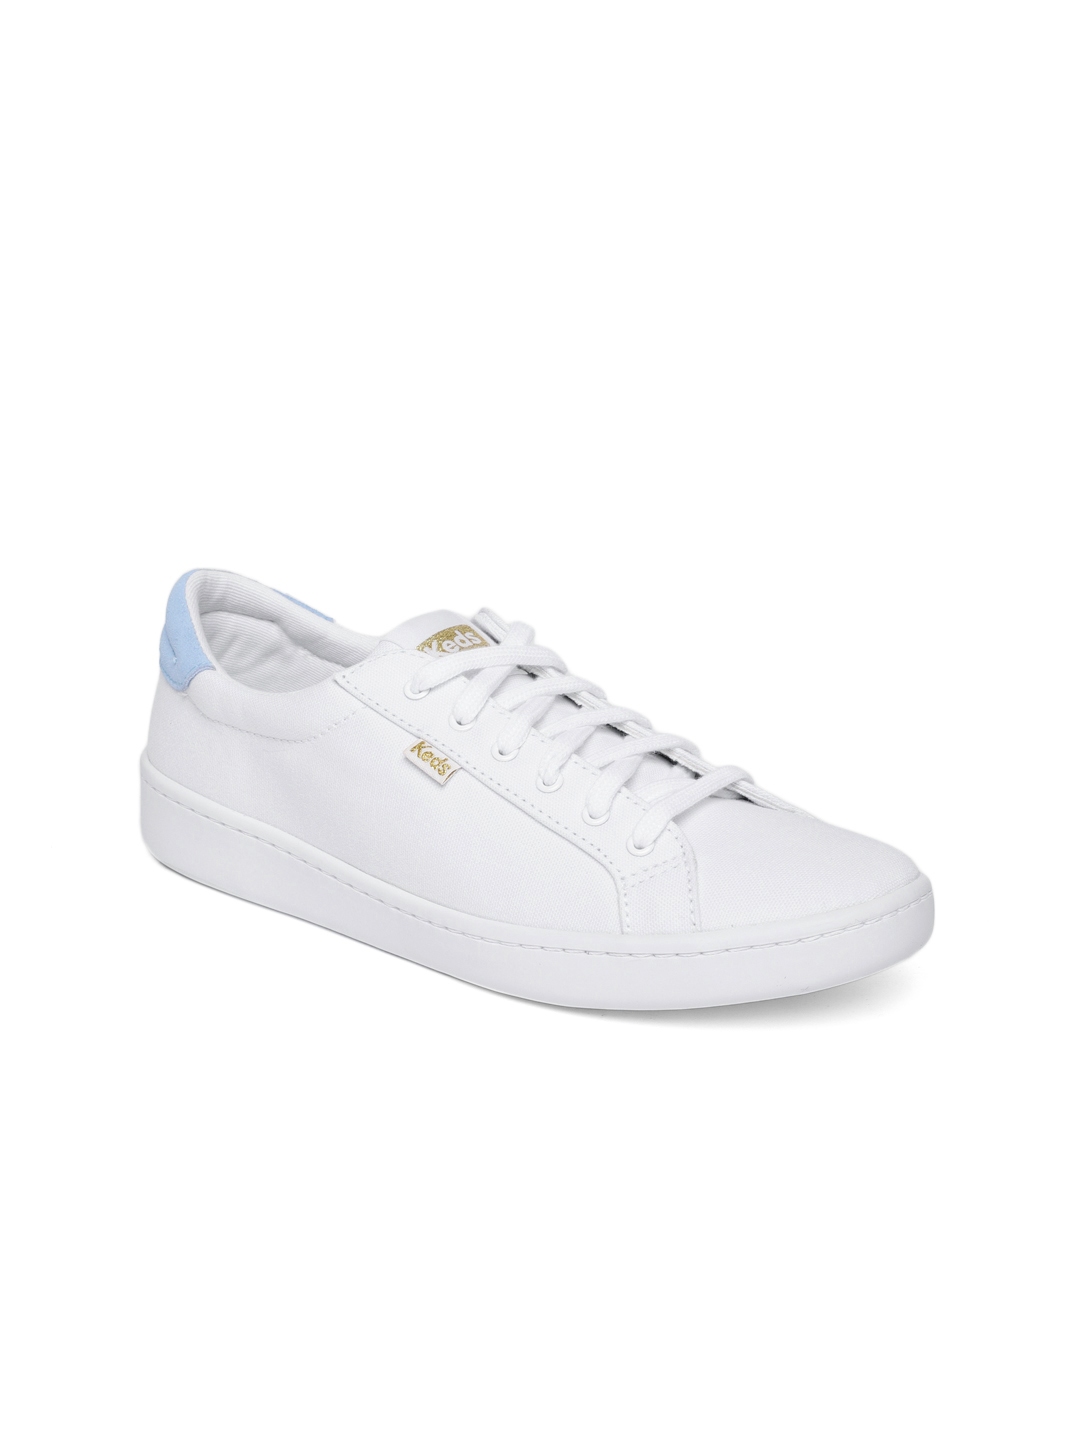 Buy Keds Women White Solid Sneakers 